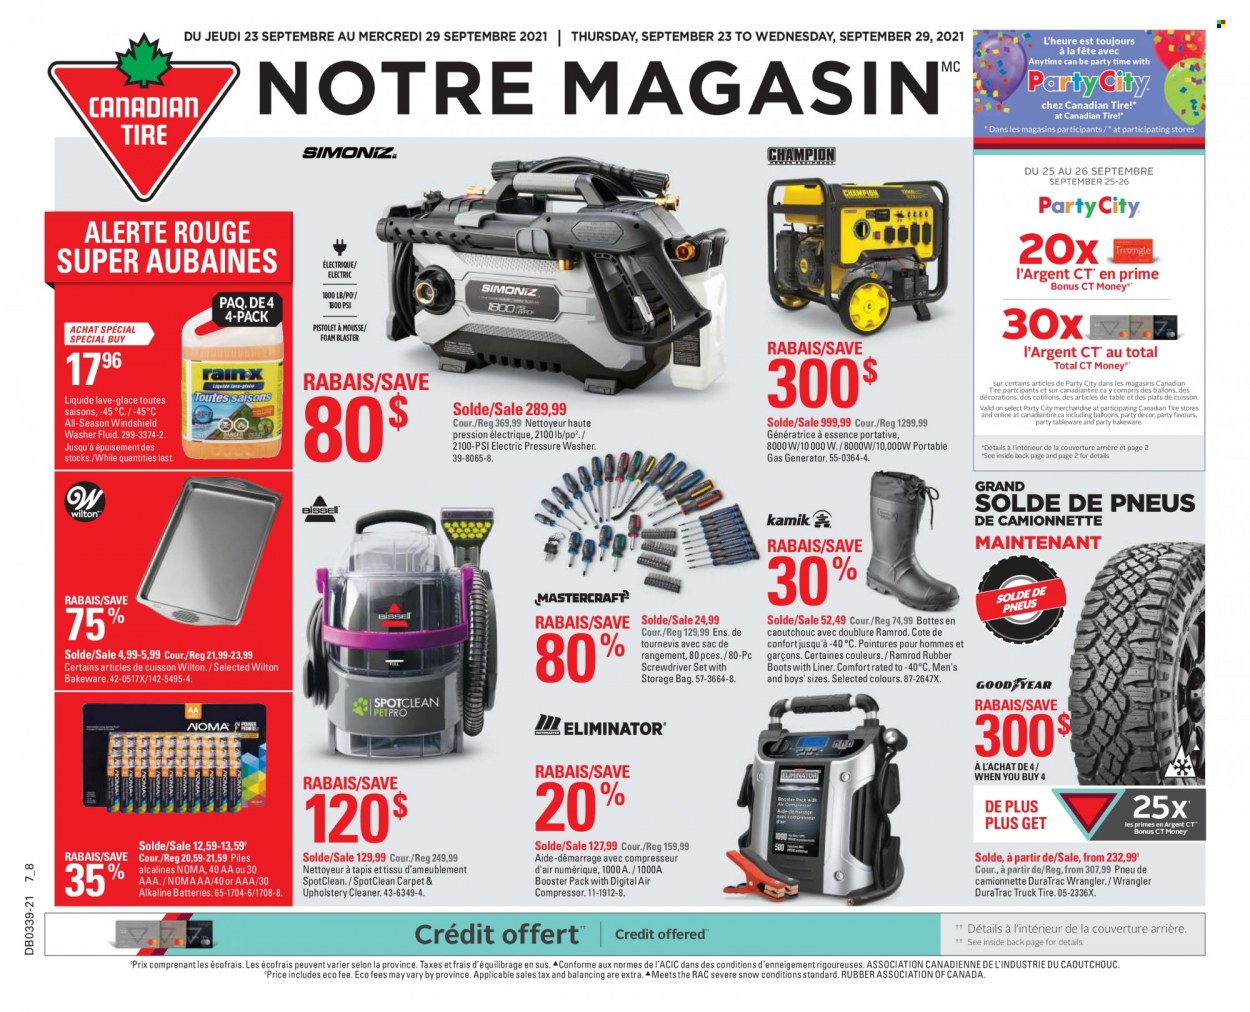 thumbnail - Canadian Tire Flyer - September 23, 2021 - September 29, 2021 - Sales products - cleaner, storage bag, tableware, bakeware, eraser, balloons, alkaline batteries, table, boots, Plus Plus, screwdriver, screwdriver set, air compressor, rubber boots, electric pressure washer, gas generator, generator, washer fluid. Page 1.